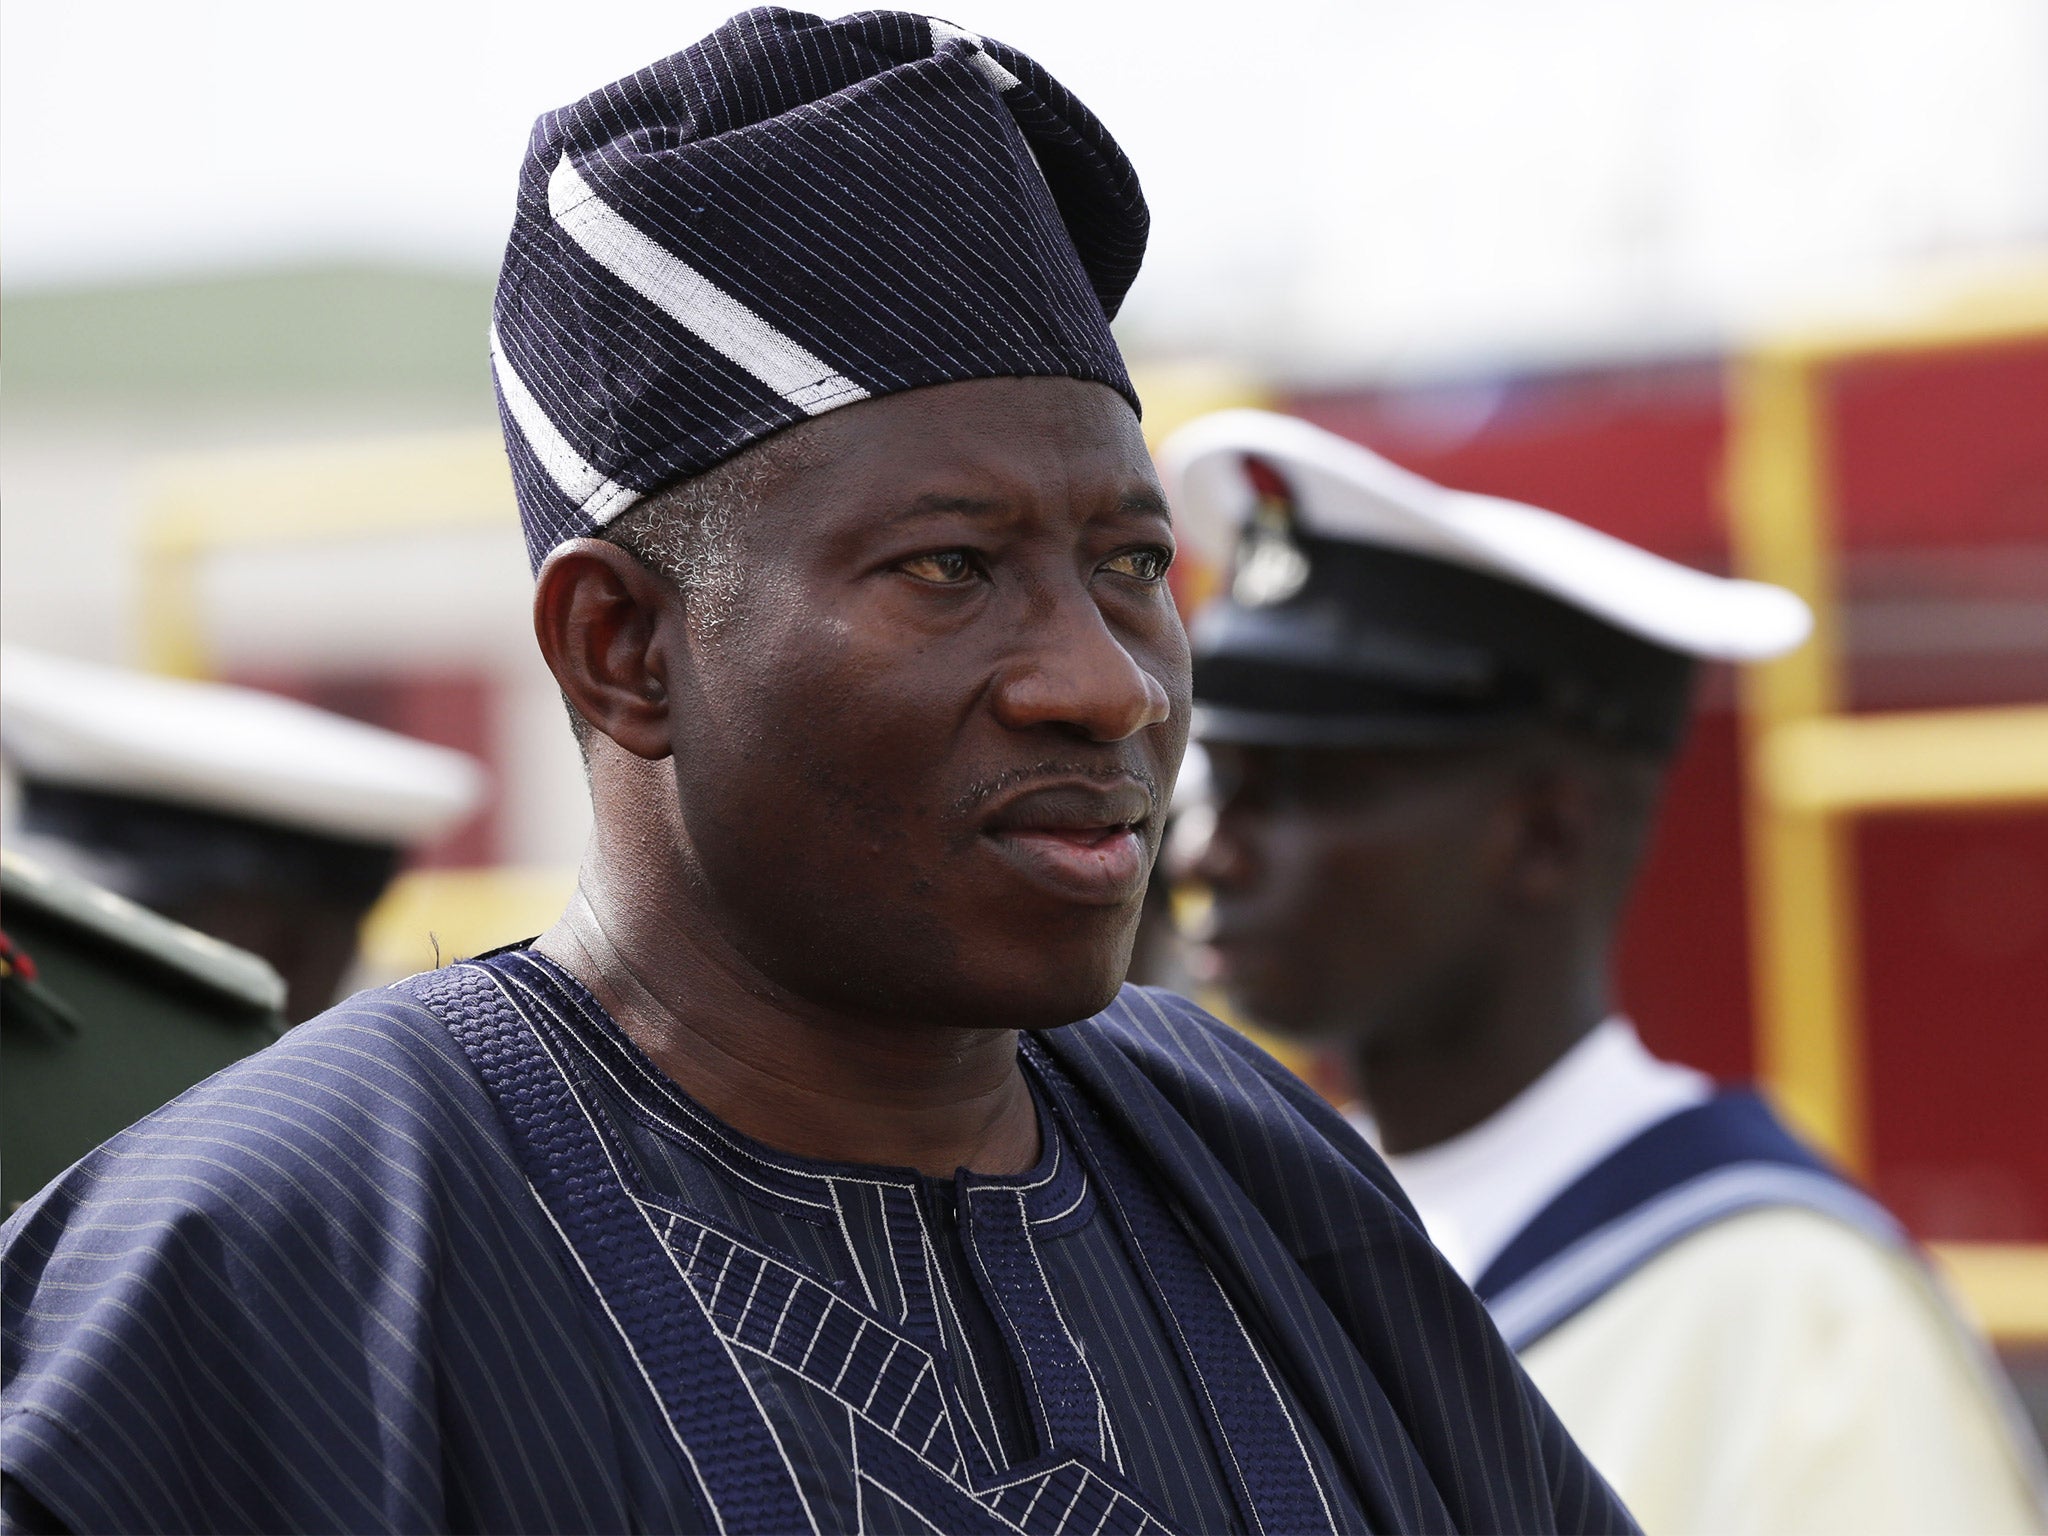 Former Nigerian president Goodluck Jonathan was allegedly one of the recipients of bribes from the deal